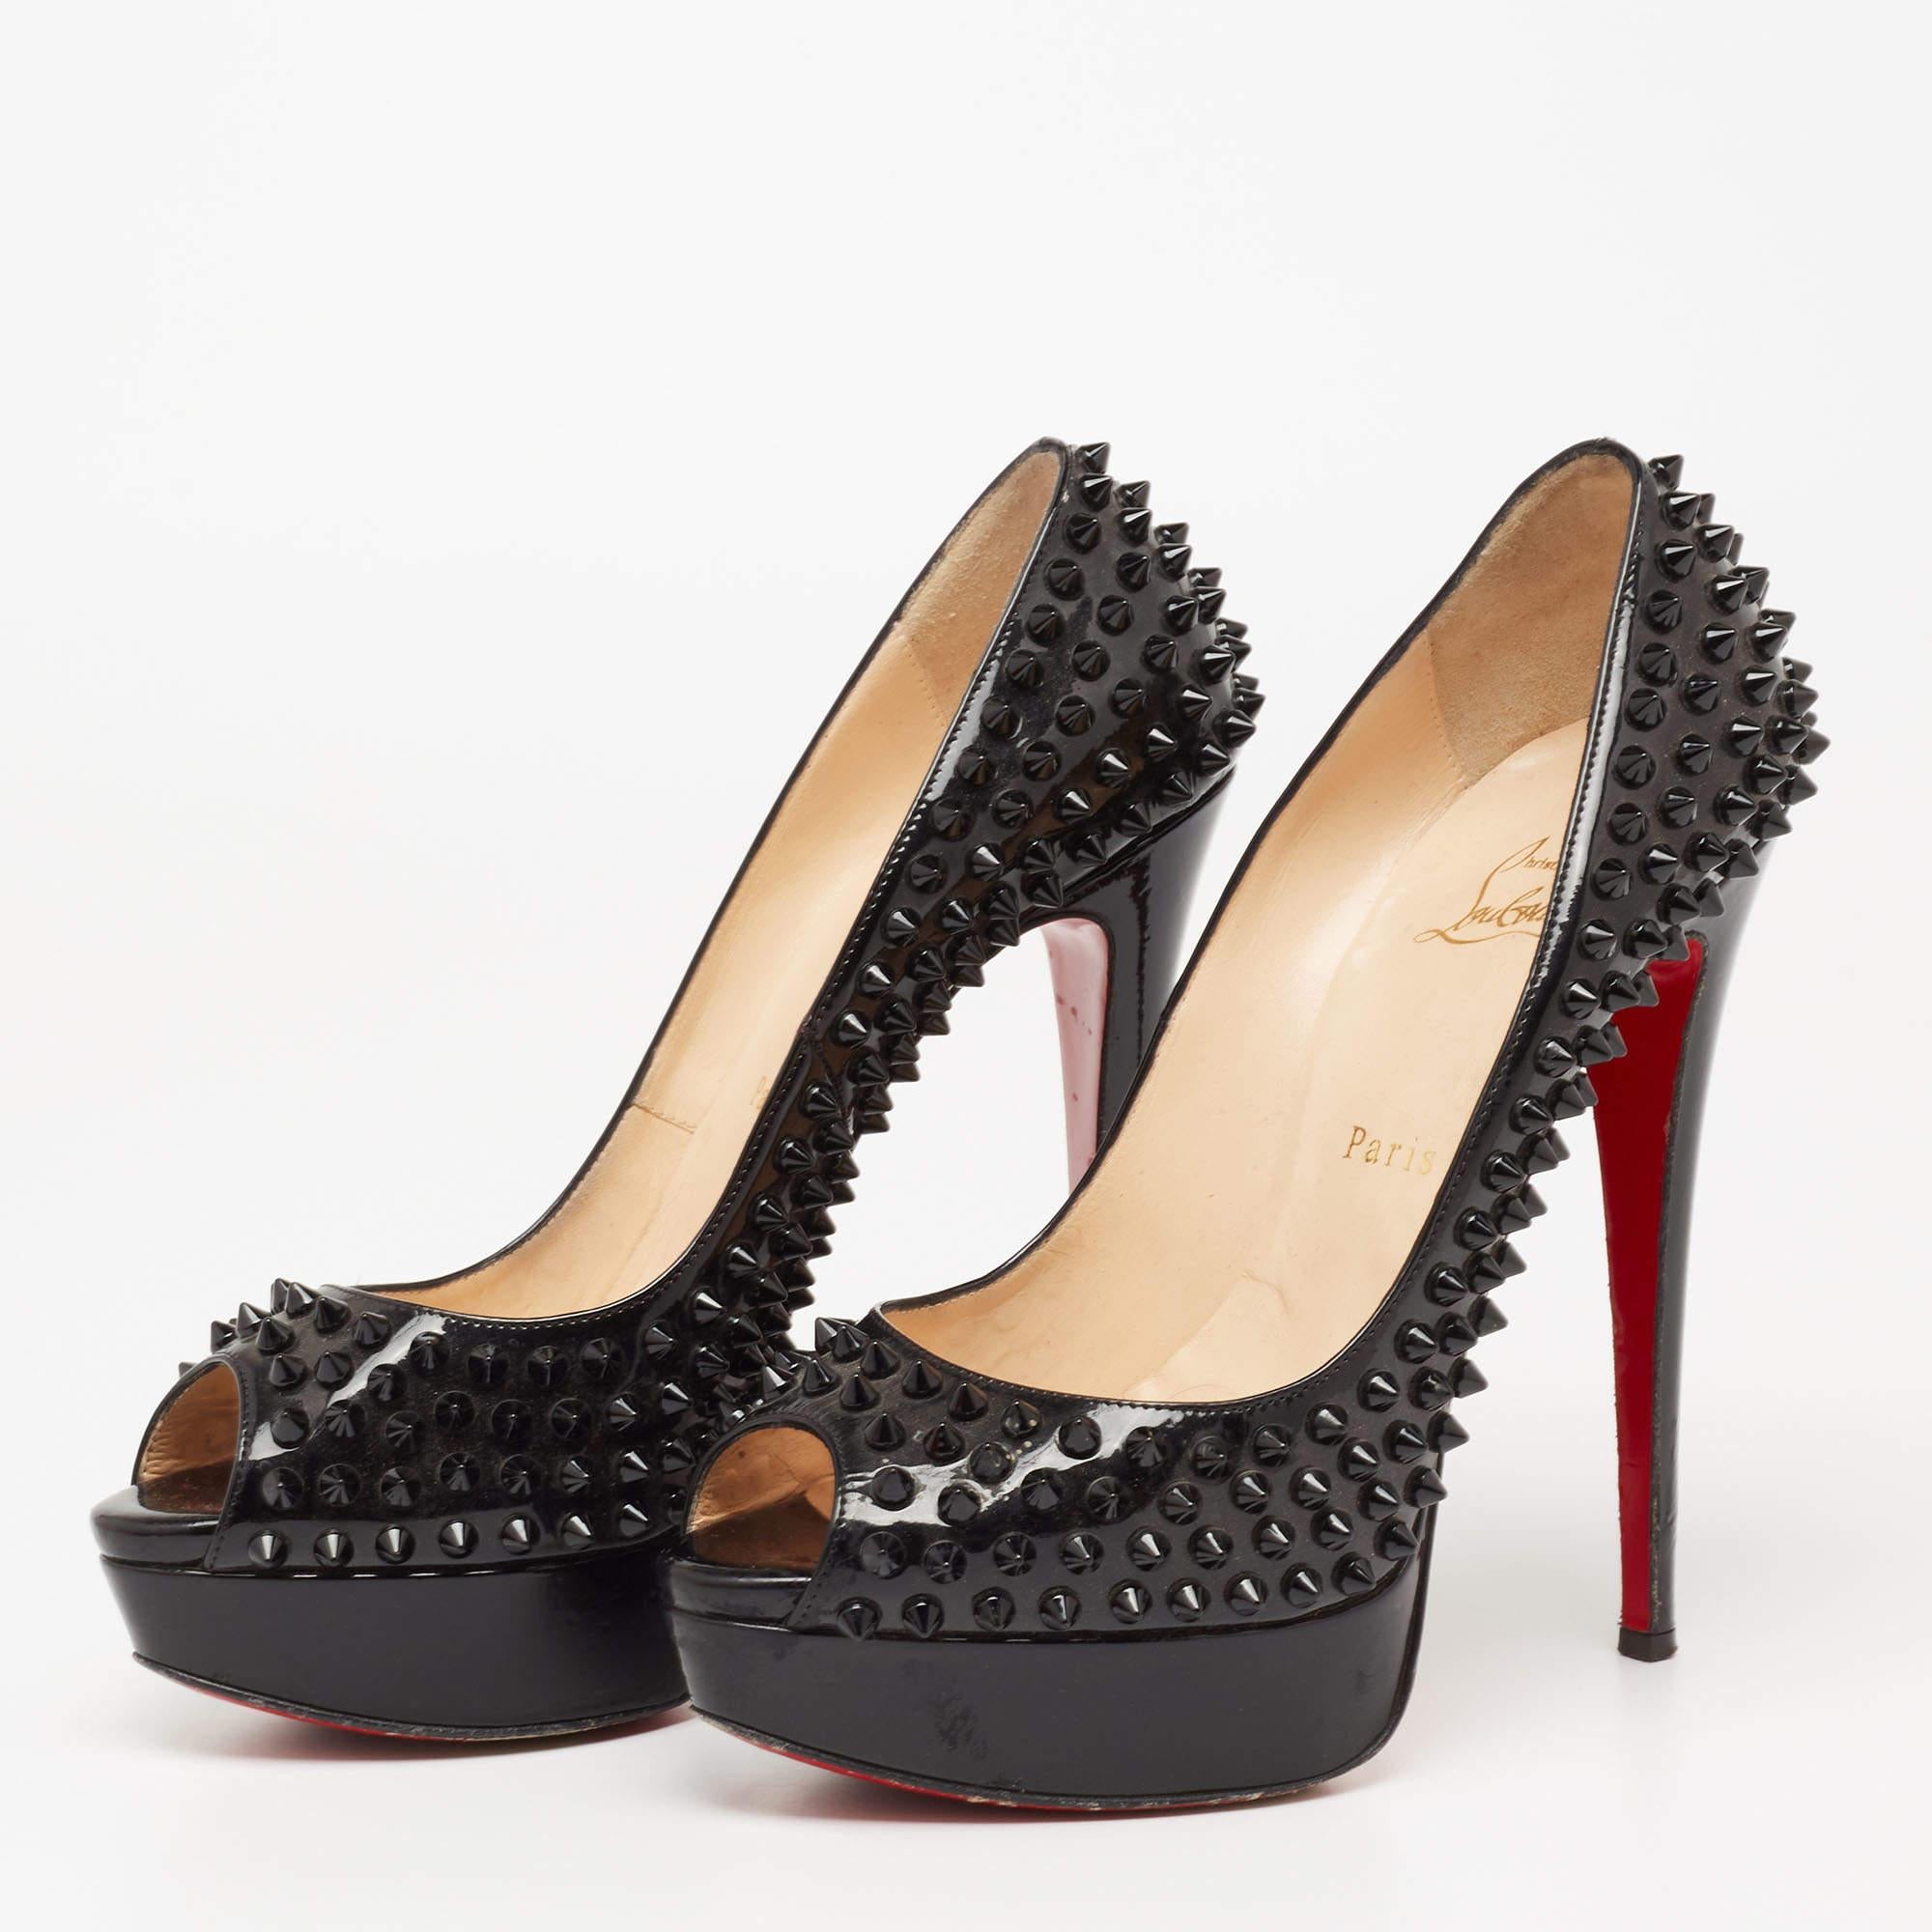 Christian Louboutin brings an element of class to your closet with these stunning Lady Peep pumps. They are created using black patent leather, which is highlighted with spike embellishments. They showcase peep toes, tall heels, and a slip-on